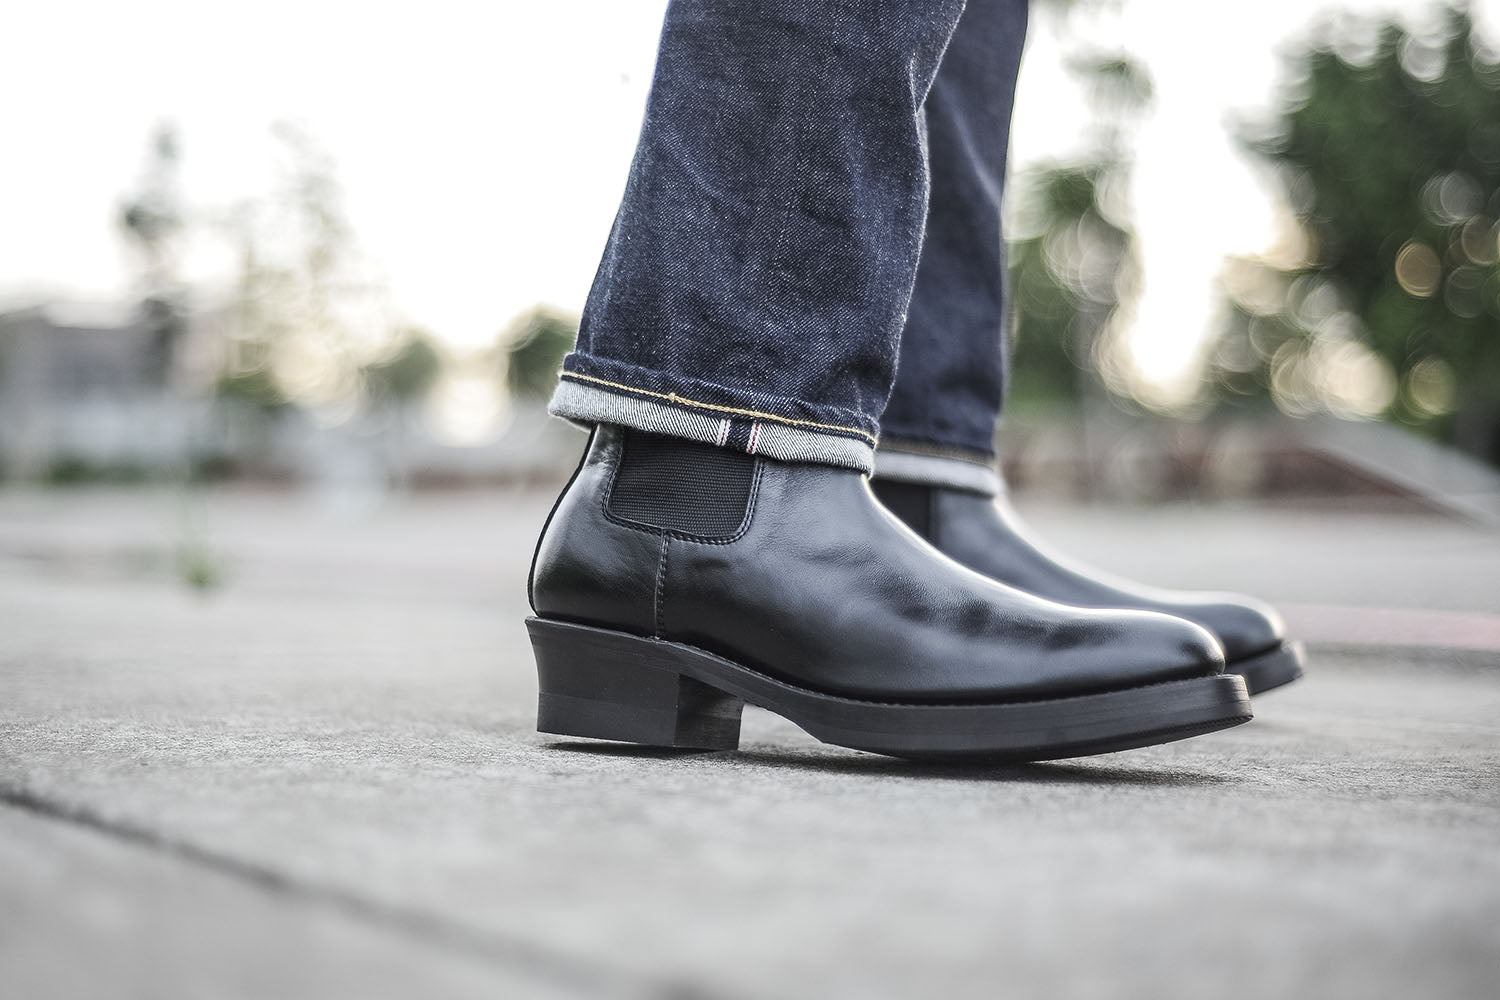 AB-03H-ST HORSEHIDE CHELSEA BOOTS - May club